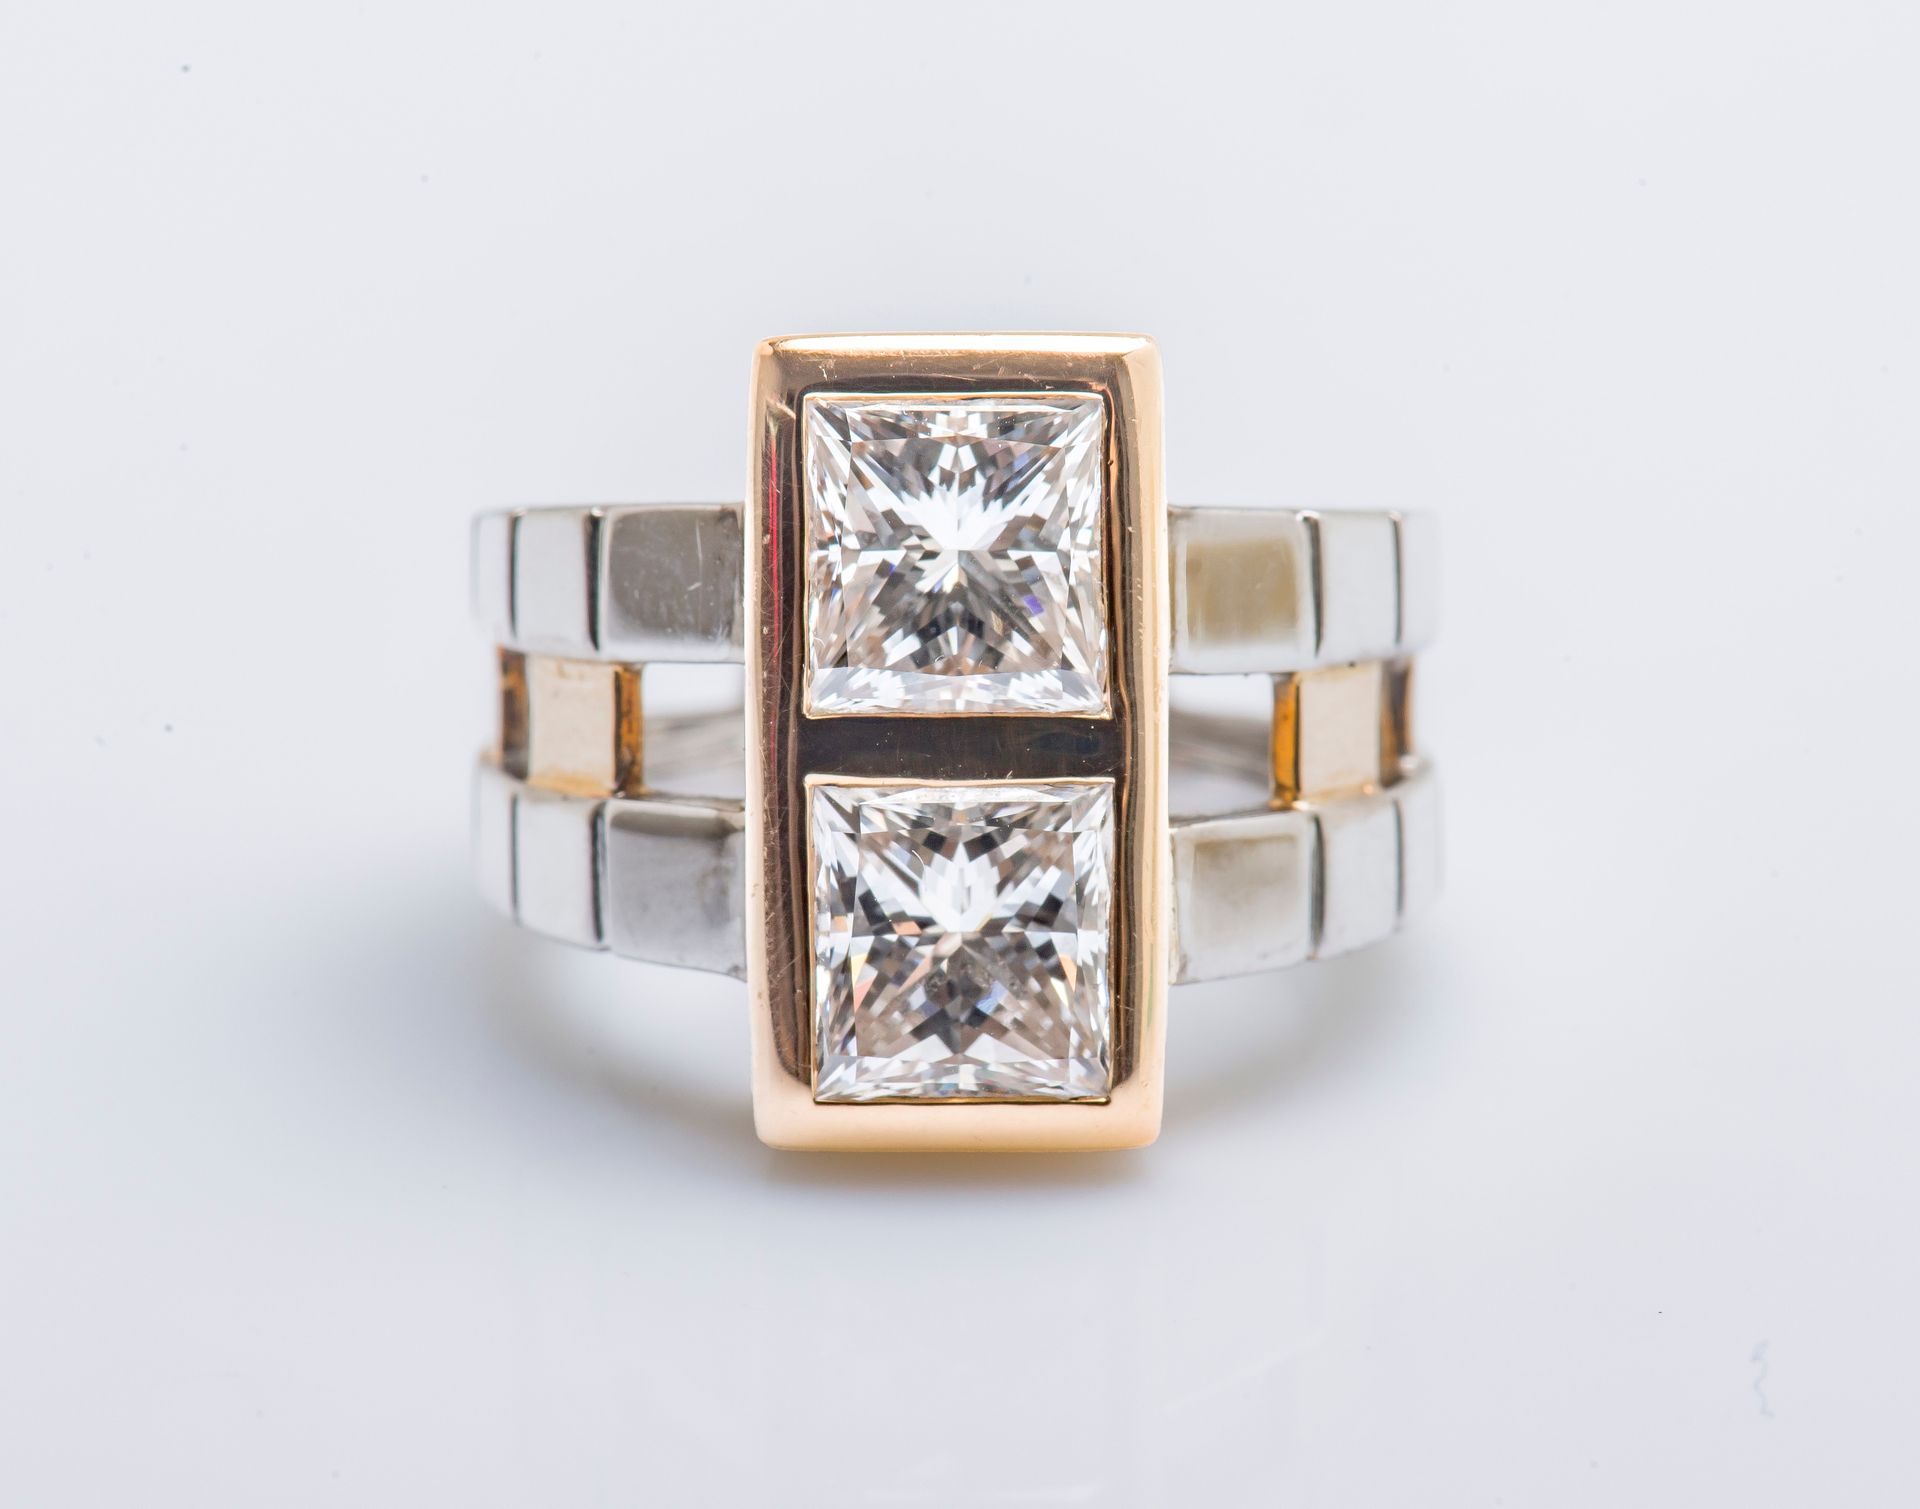 Null Ring in white gold and pink gold 18 carats (750 thousandths) decorated with&hellip;